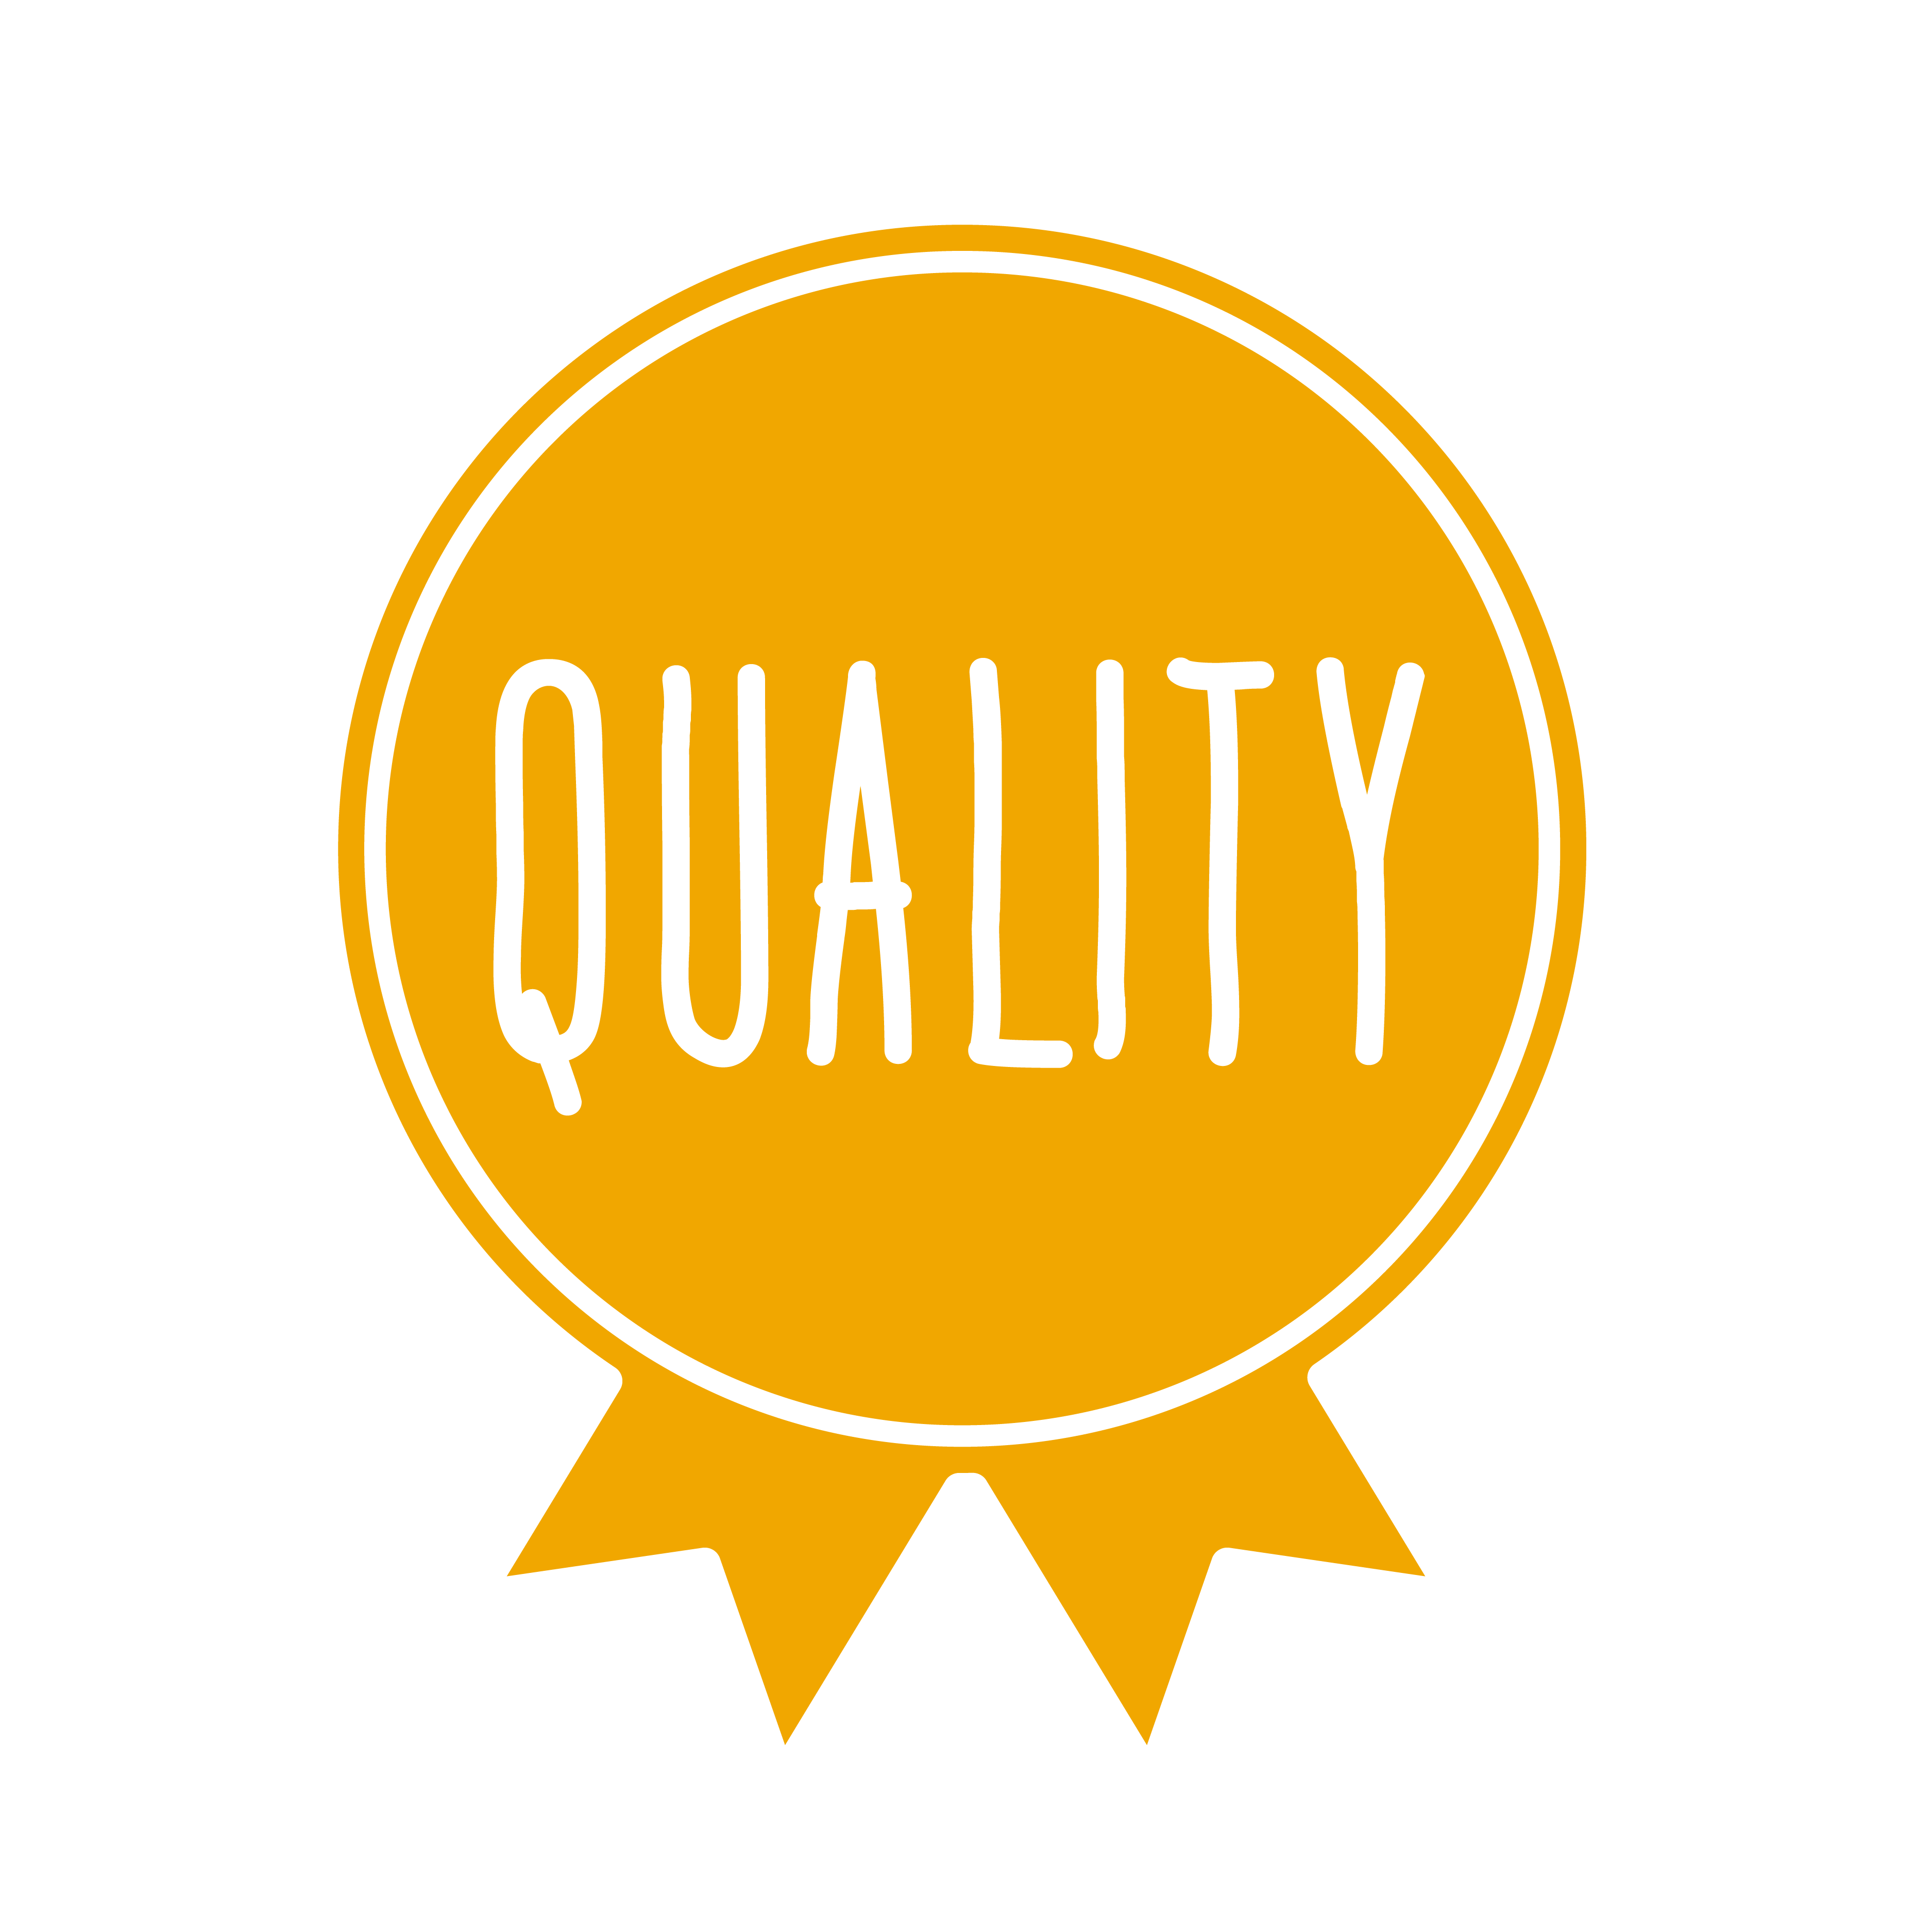 the mixing bowl cafe quality badge